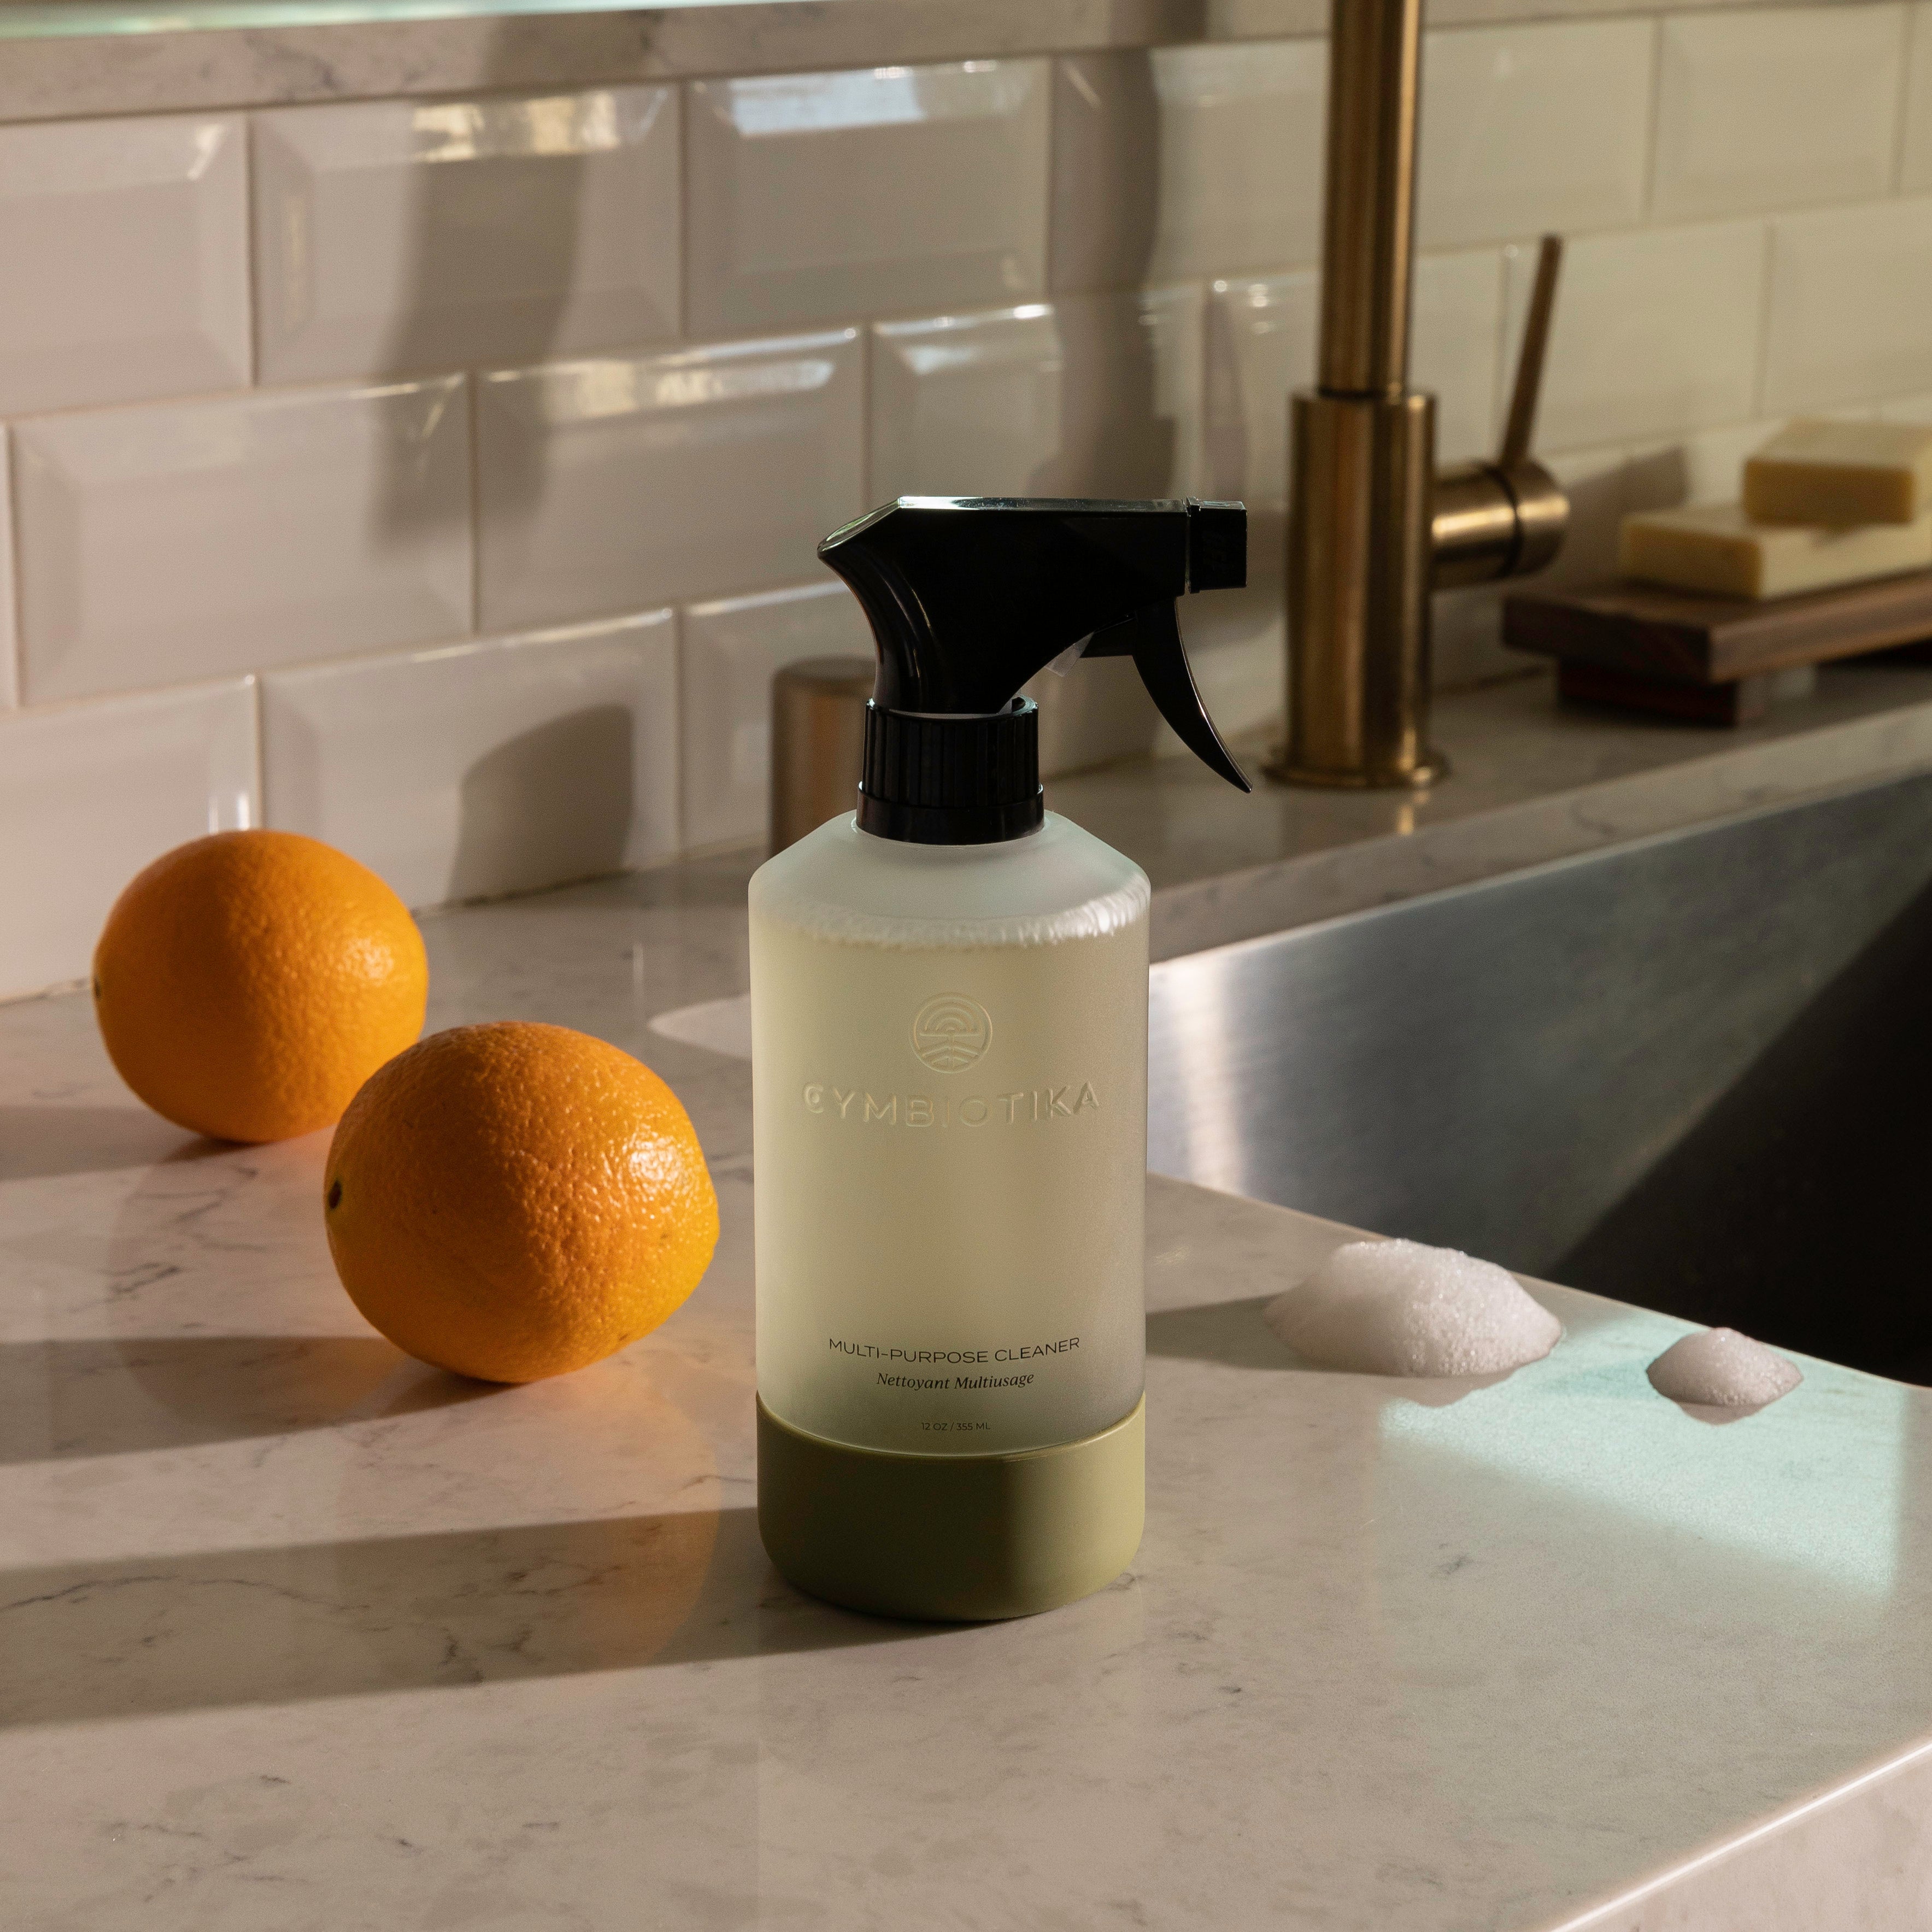 Multi-Purpose Cleaner Bottle On Counter next to Two Oranges